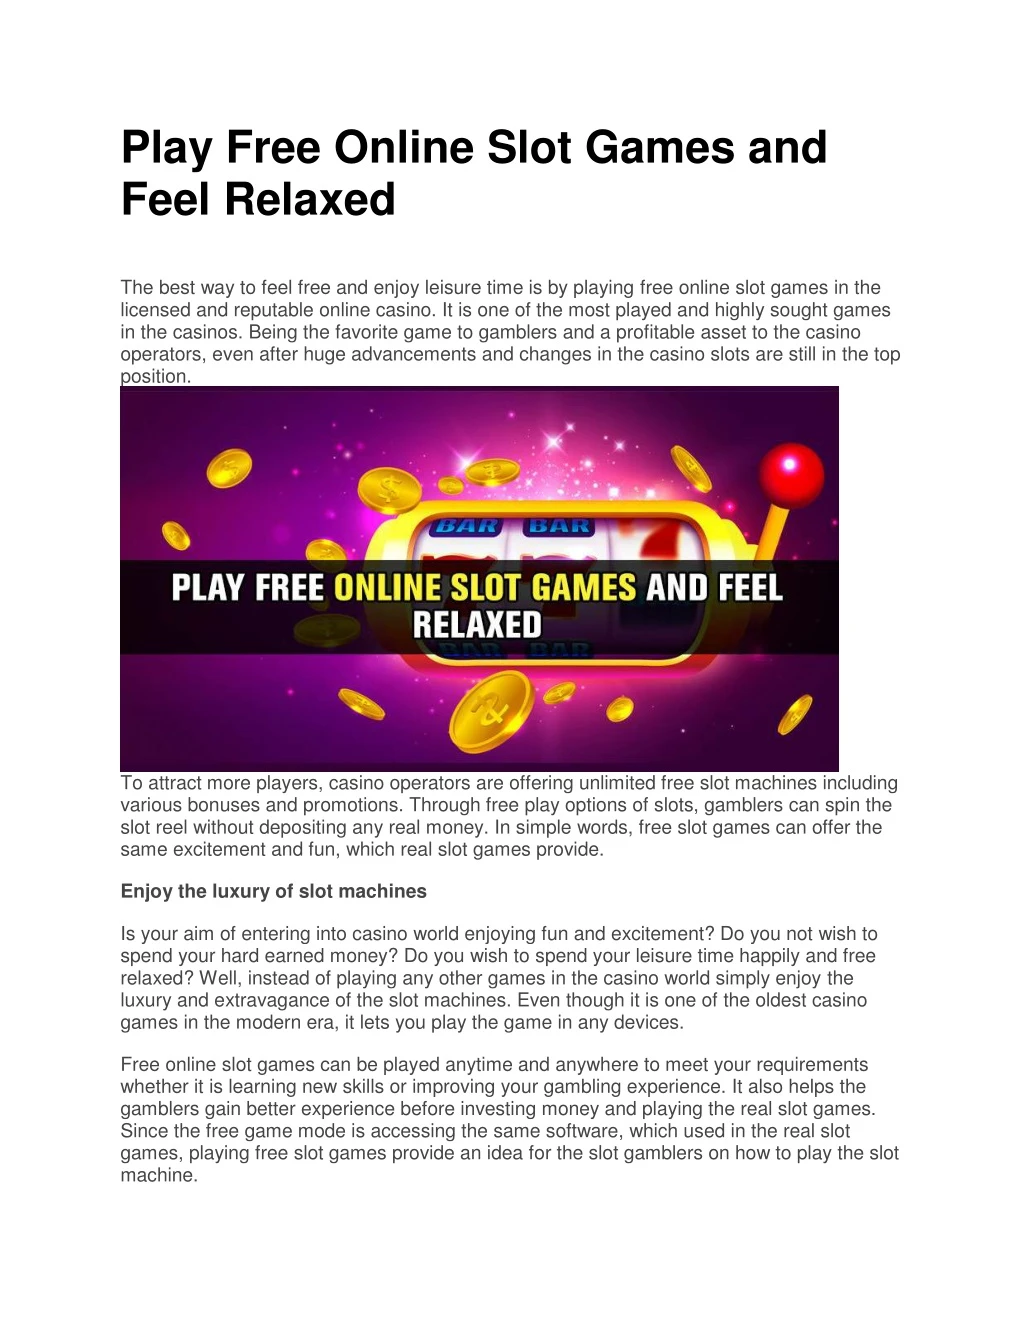 play free online slot games and feel relaxed